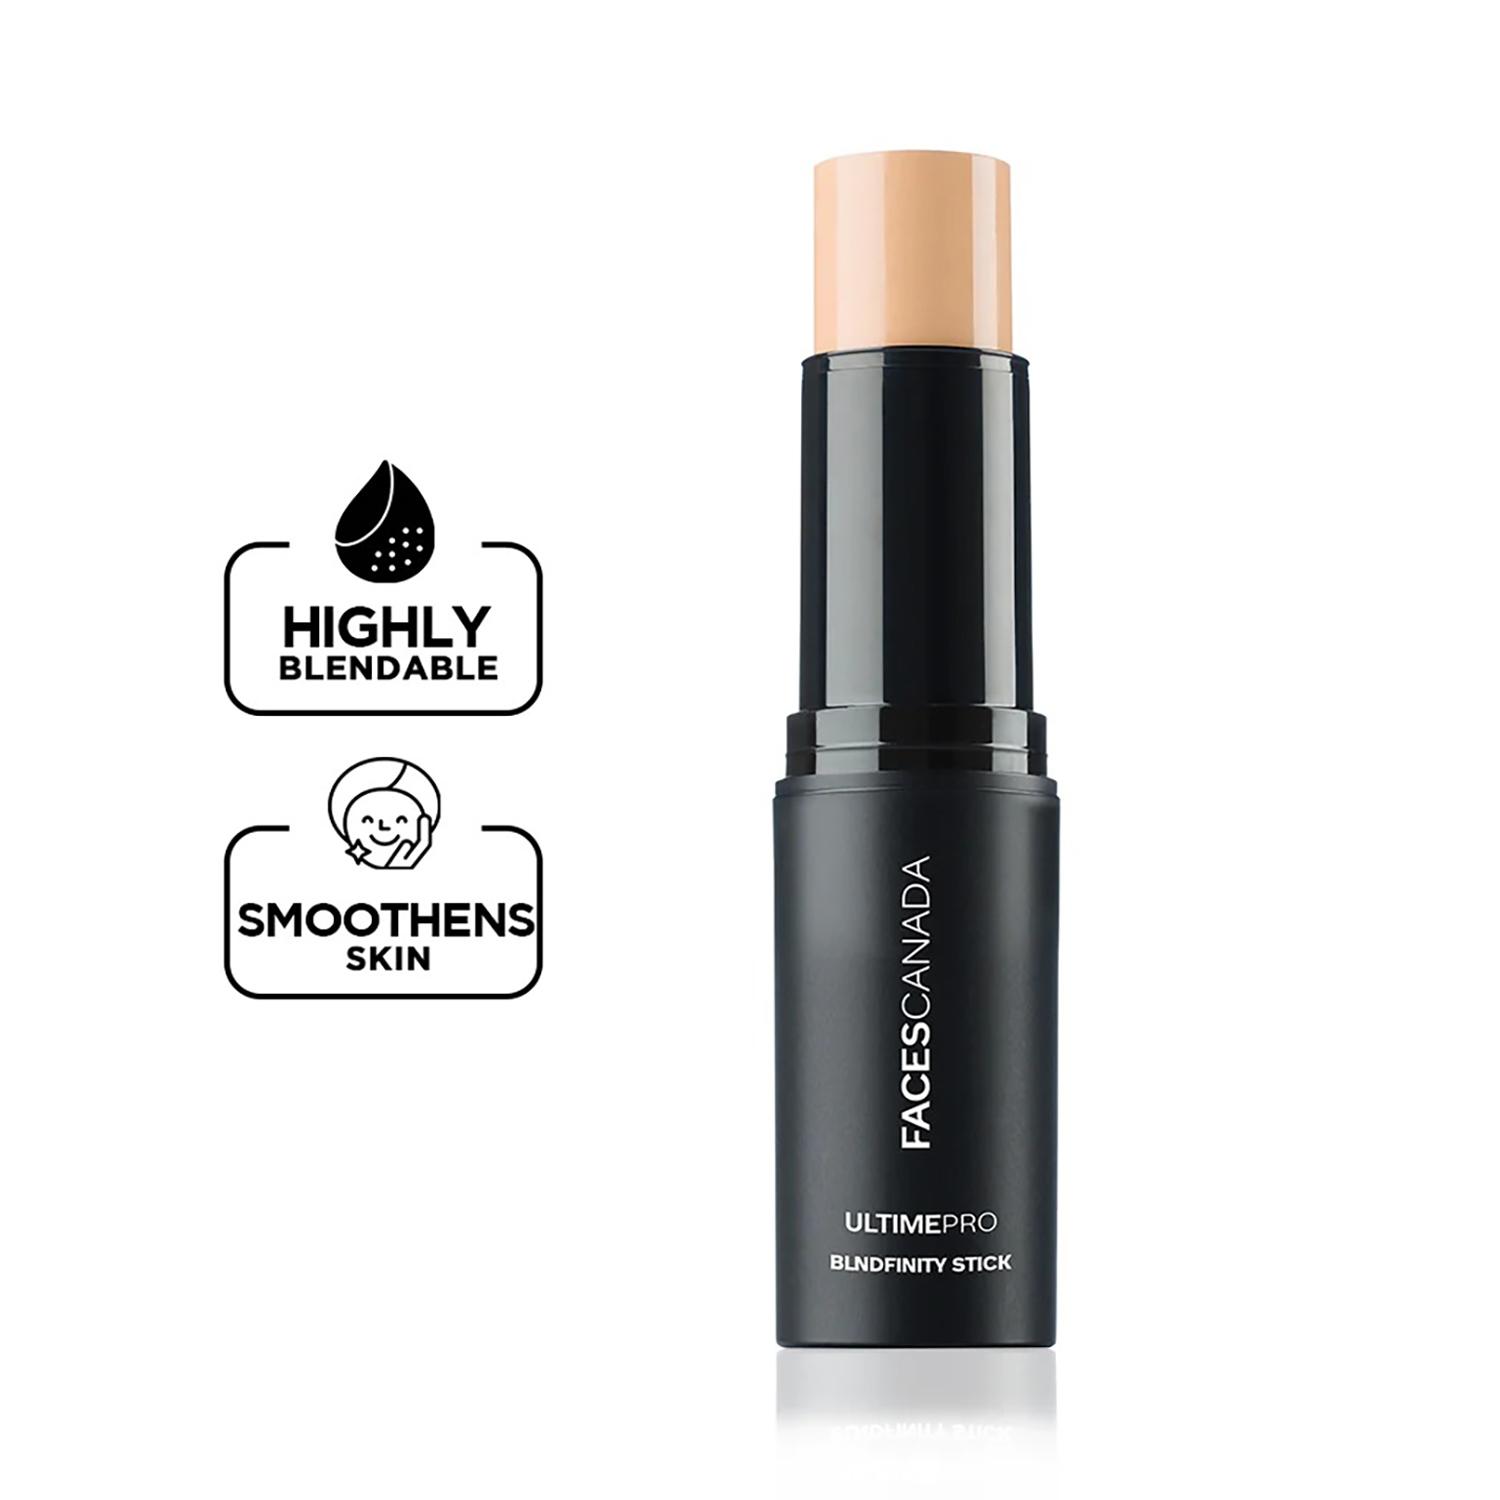 Faces Canada | Faces Canada Ultime Pro BlendFinity Stick Concealer - Light, Creamy Texture (10 g)